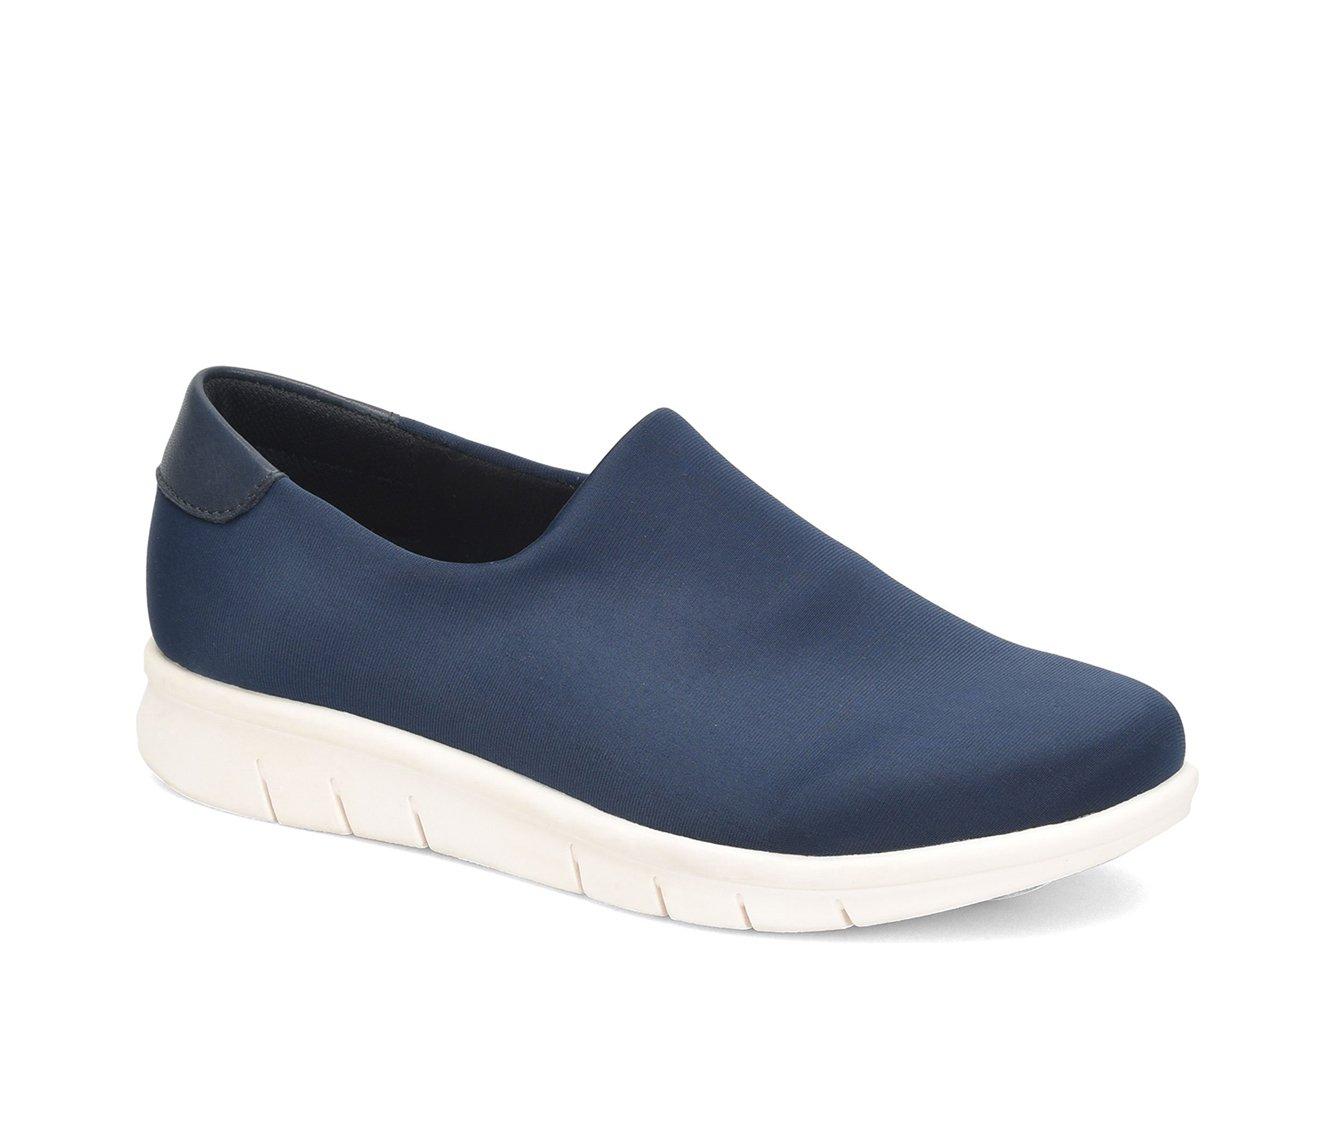 Women's Comfortiva Cate Slip-On Shoes